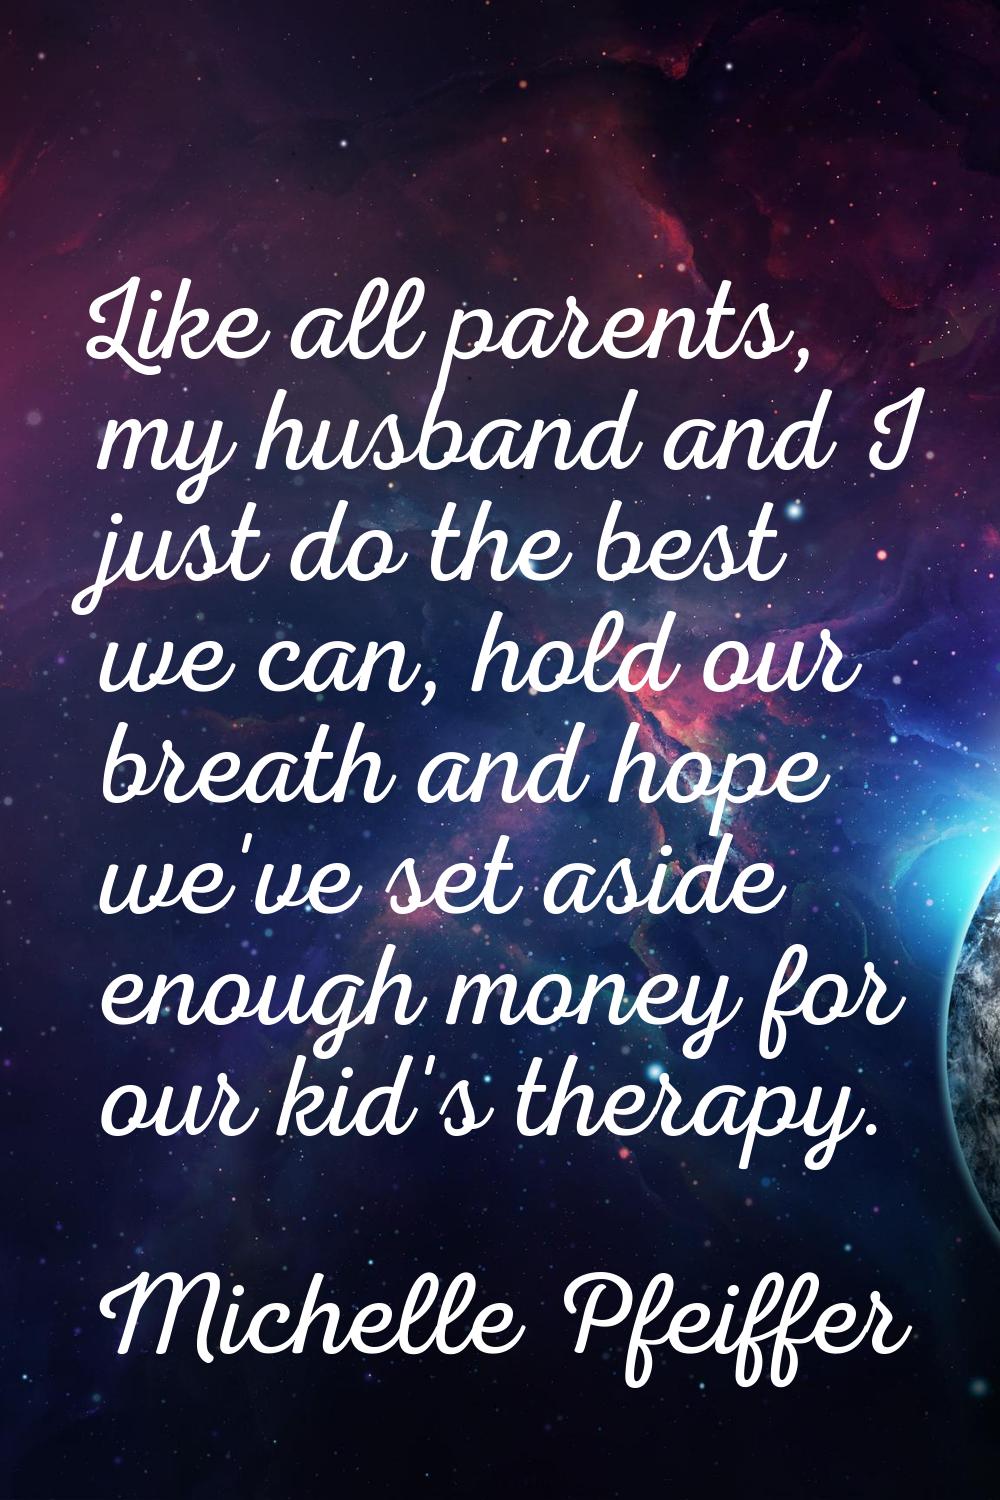 Like all parents, my husband and I just do the best we can, hold our breath and hope we've set asid